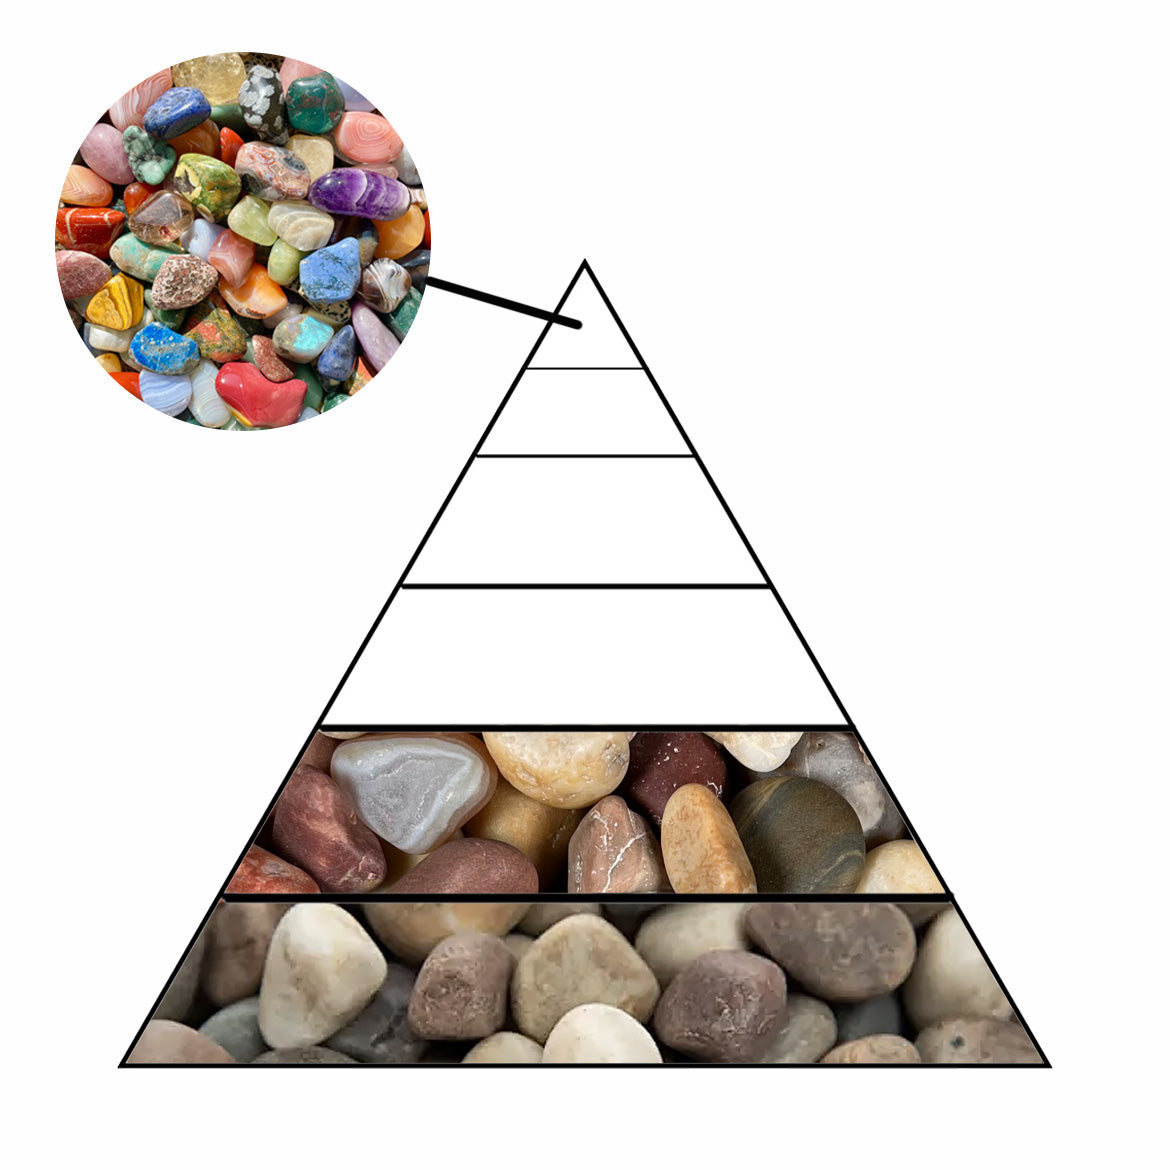 A sectioned pyramid diagram showcasing low grade polished rocks at the bottom and high grade tumbled stones at the top.